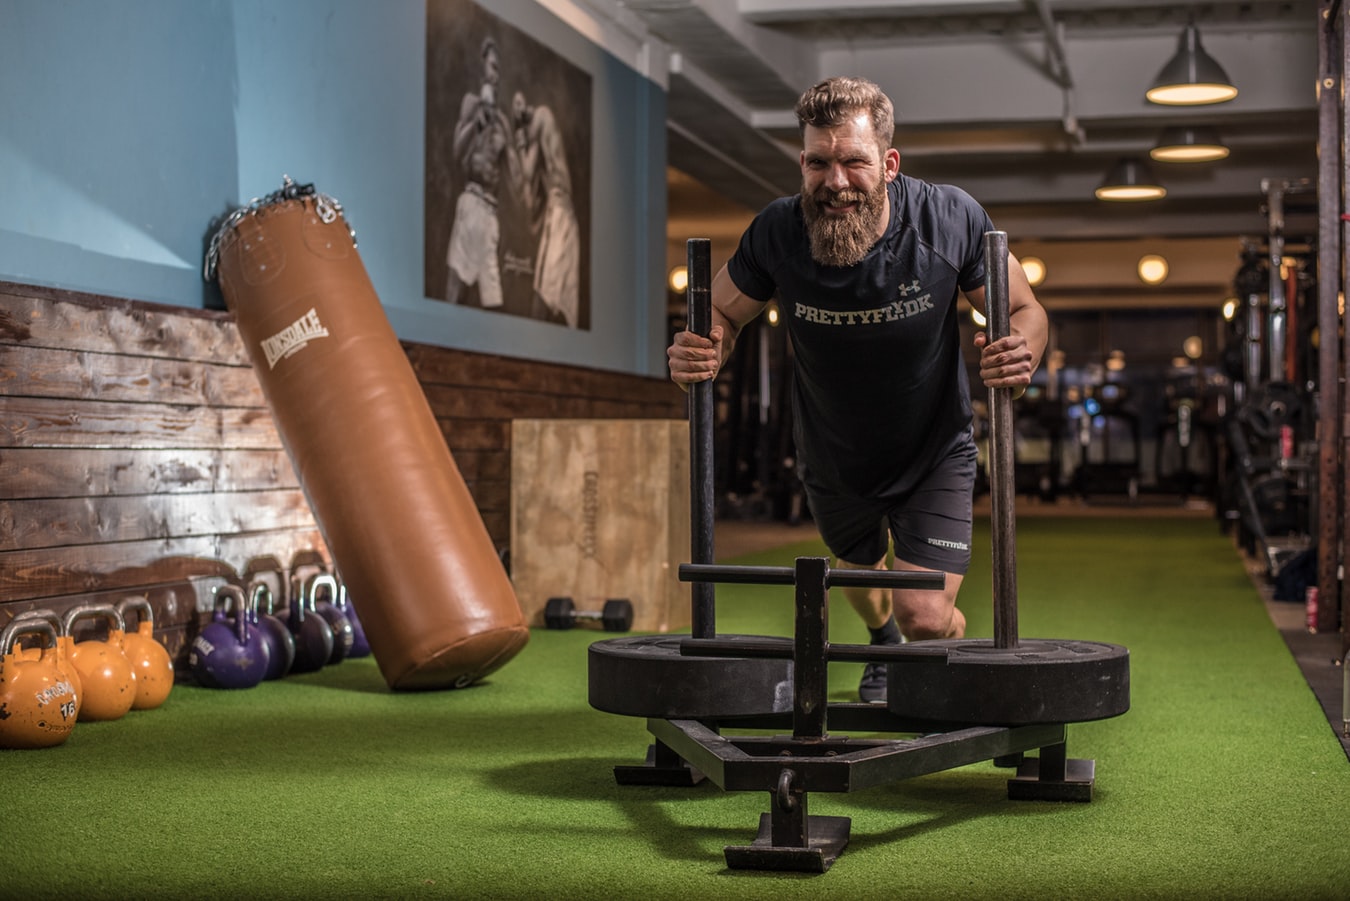 Man pushing prowler as part of strength and conditioning workout